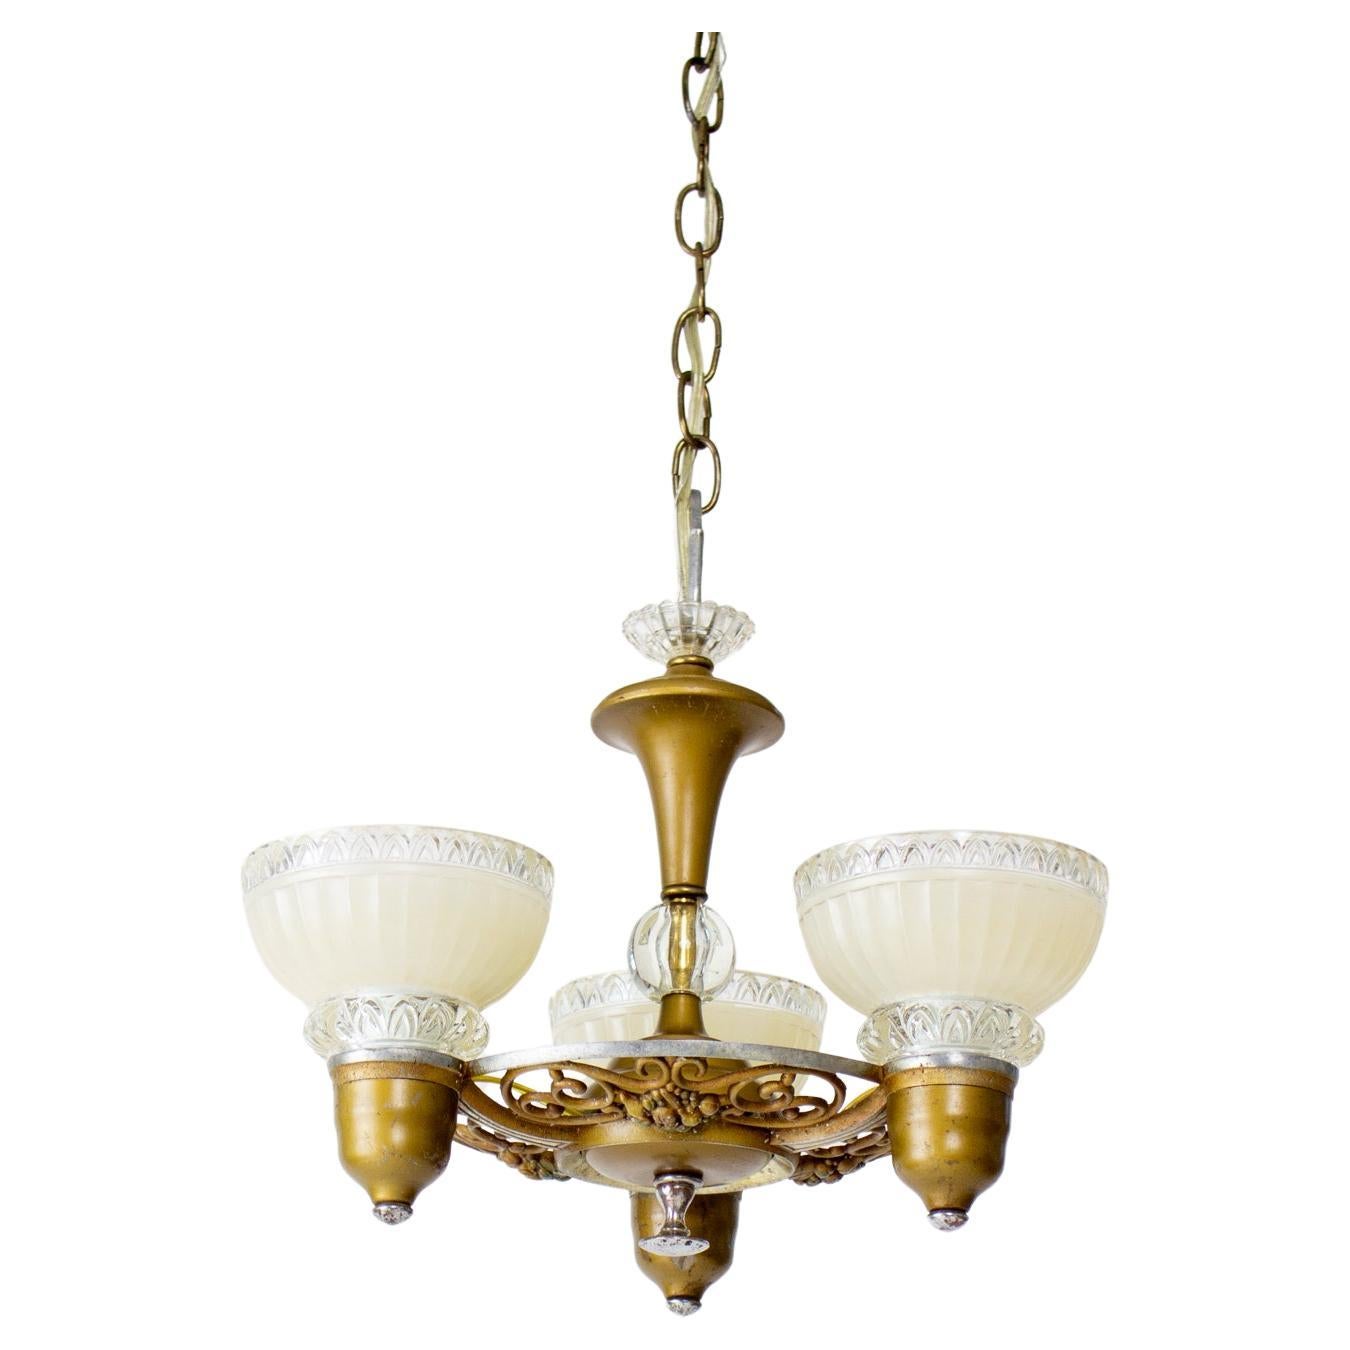 1930’s Art Deco Chandelier with Cream and Clear Glass Shades